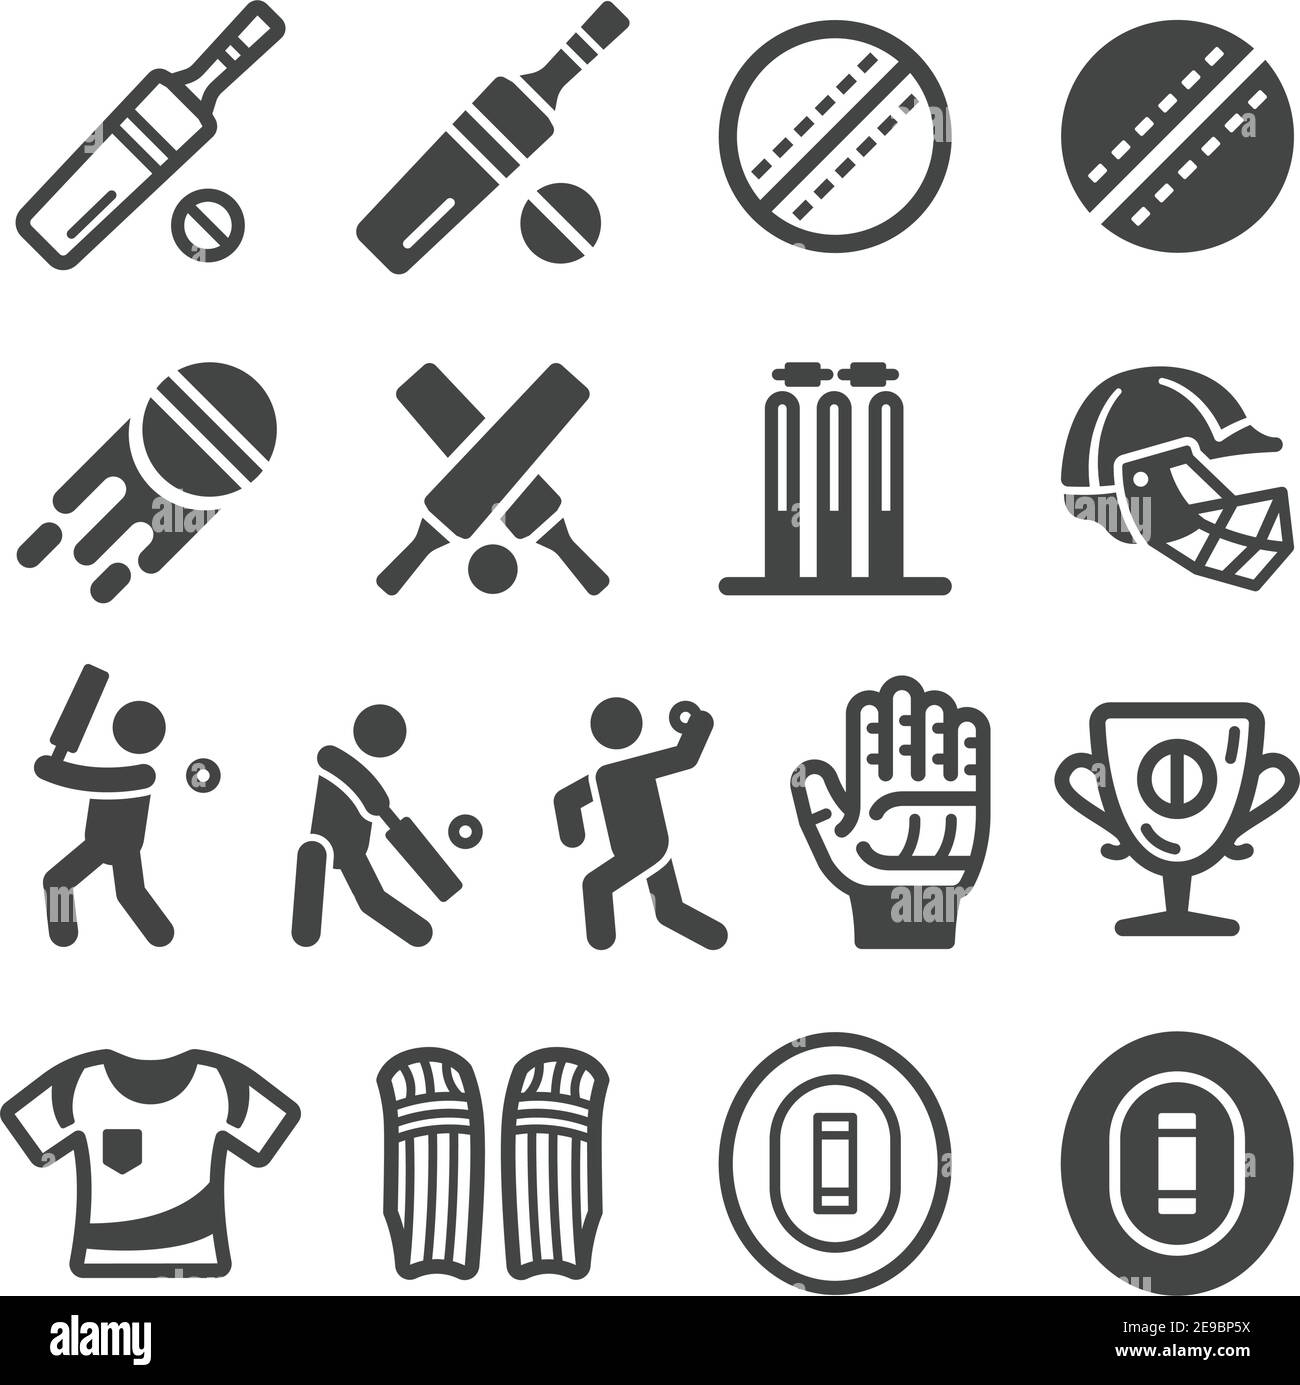 cricket sport and recreation icon set,vector and illustration Stock Vector